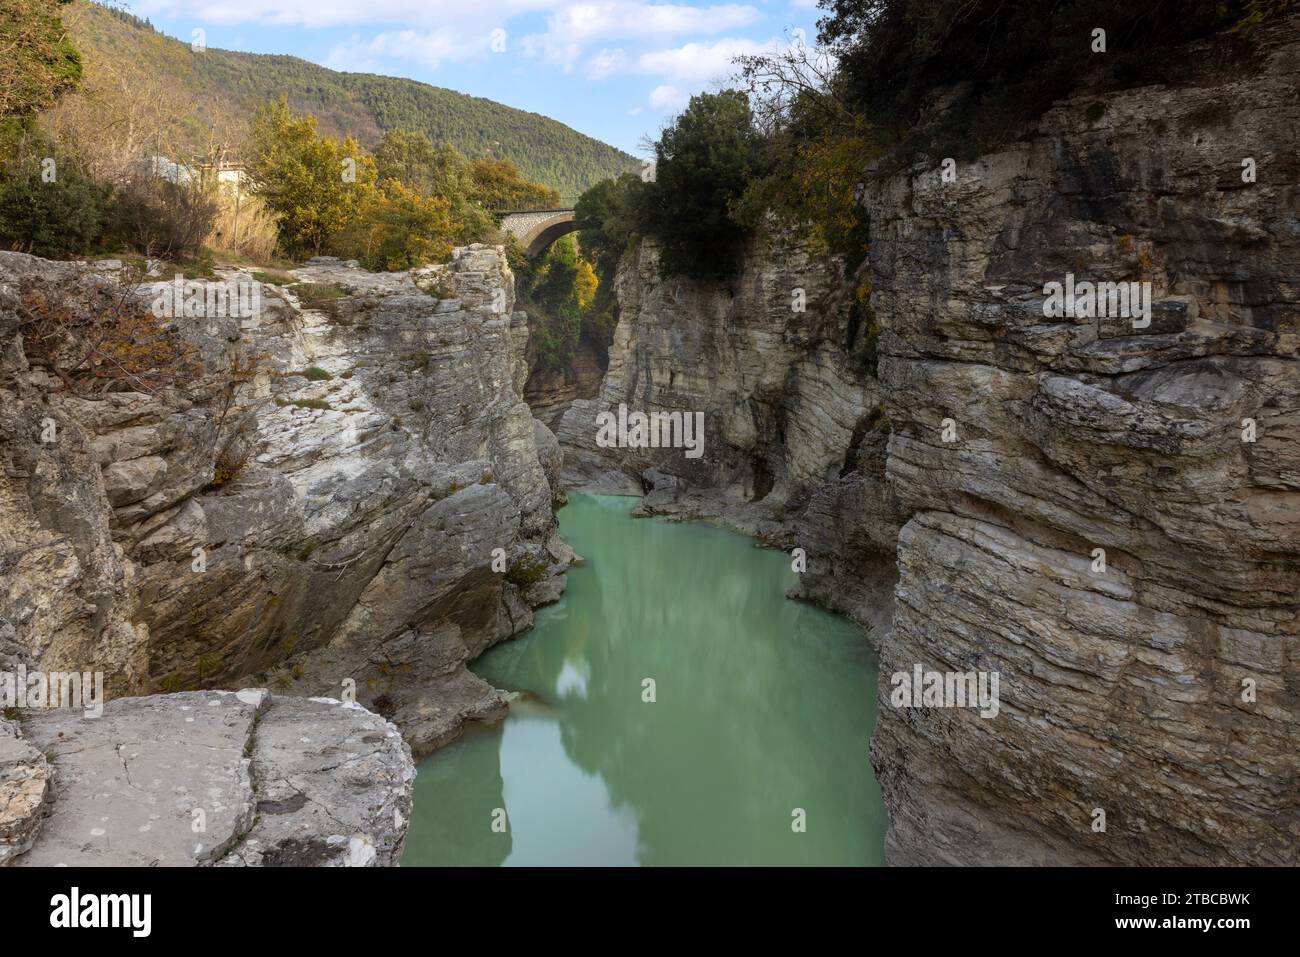 Marmitte dei Giganti, a natural canyon carved by the Metauro River in Fossombrone, Marche, Italy. Stock Photo